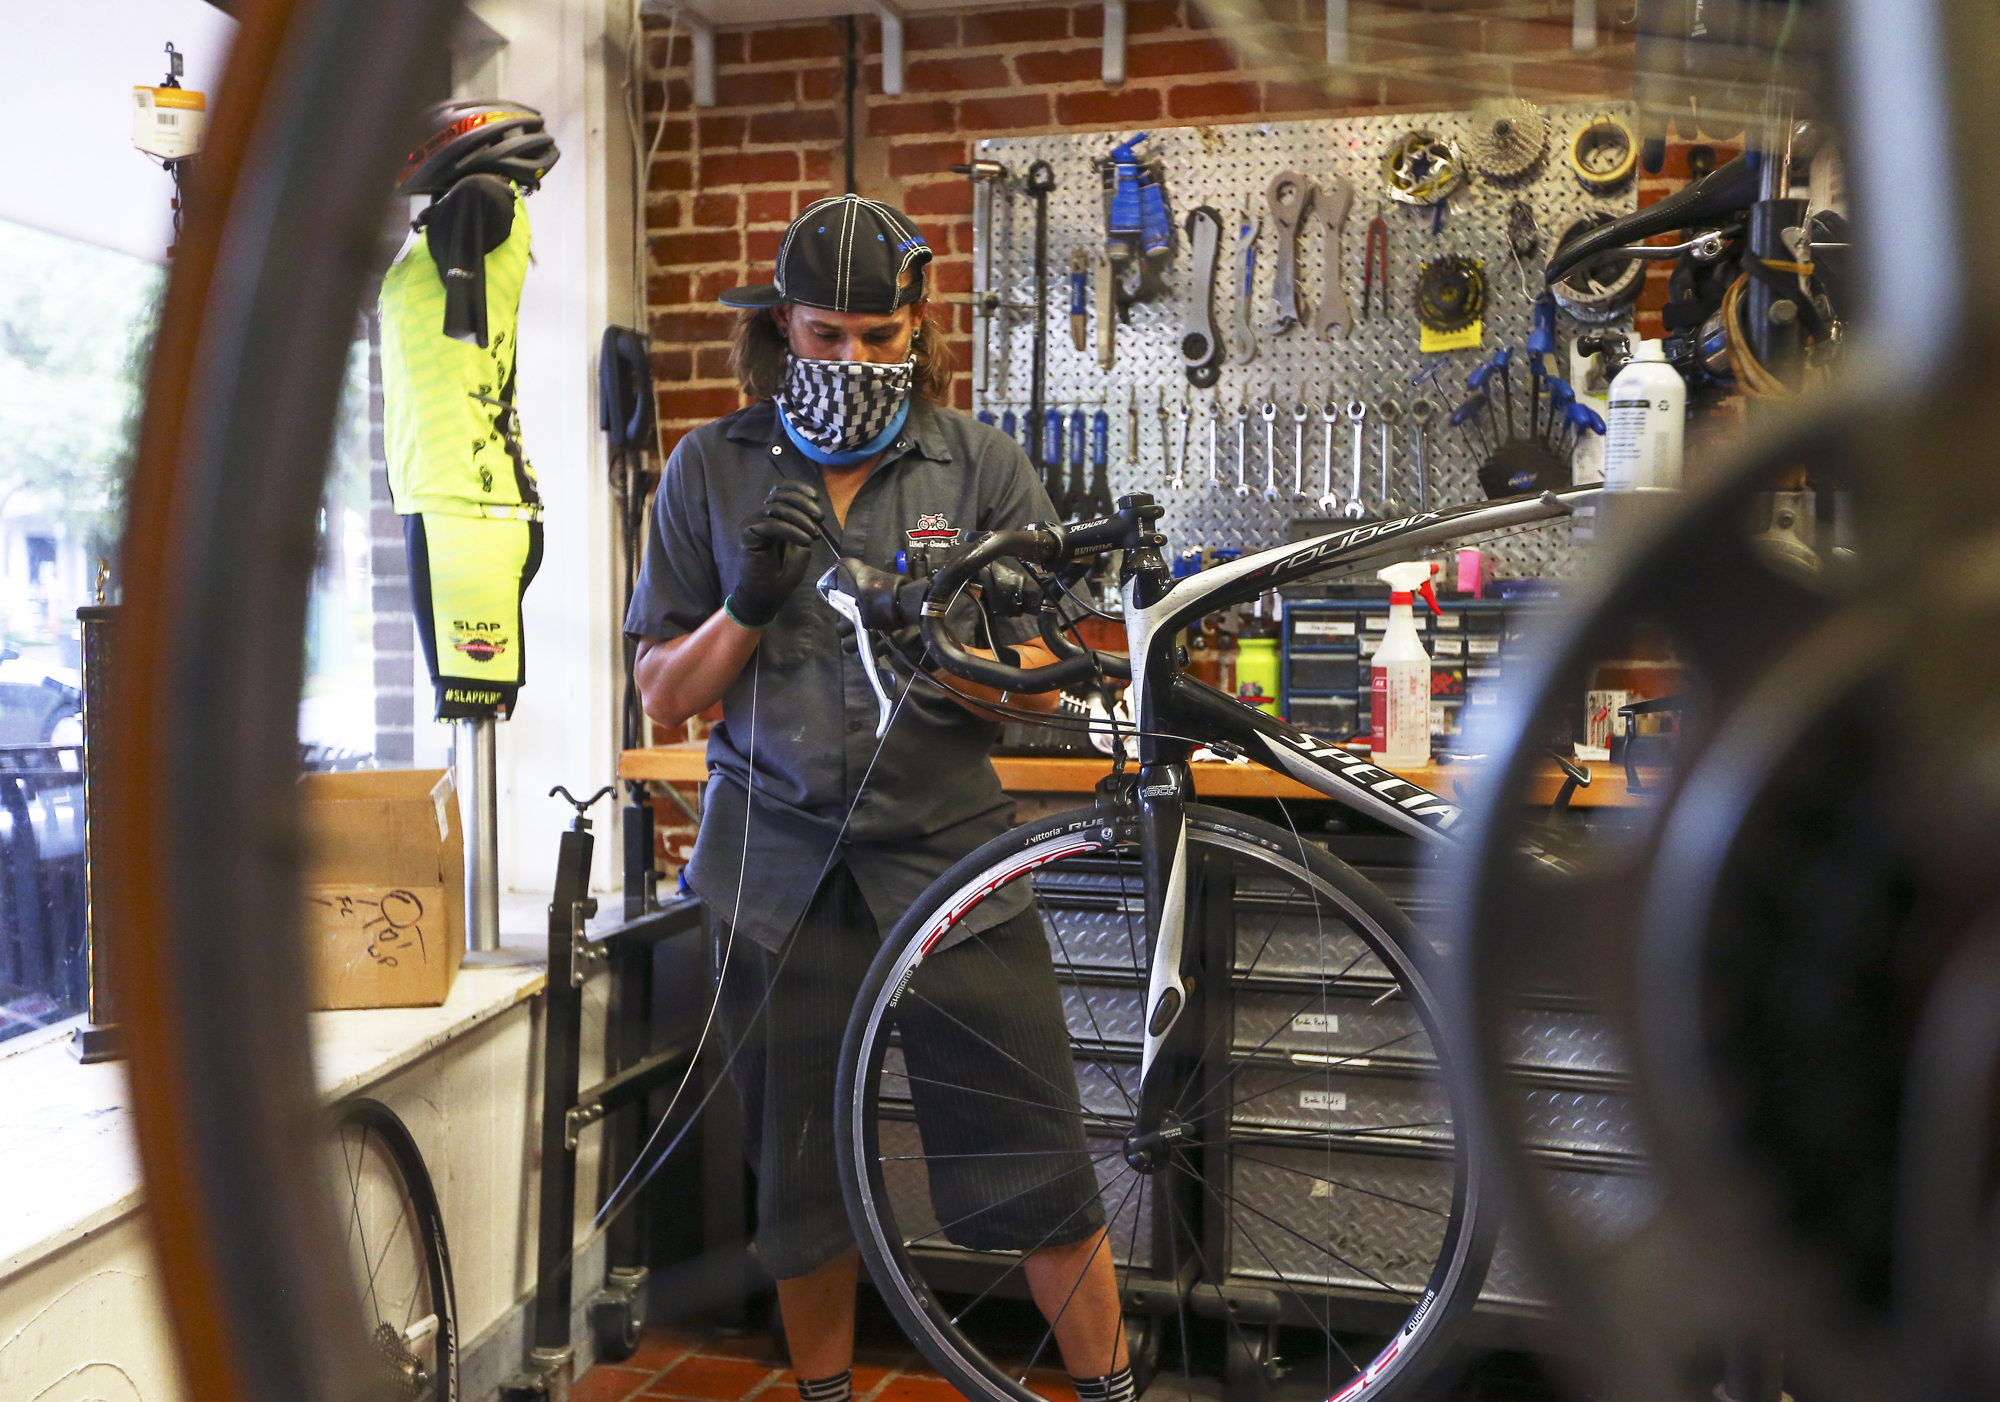 Wess Irons works on a bike during a busy day at Winter Garden Wheel Works in downtown Winter Garden.